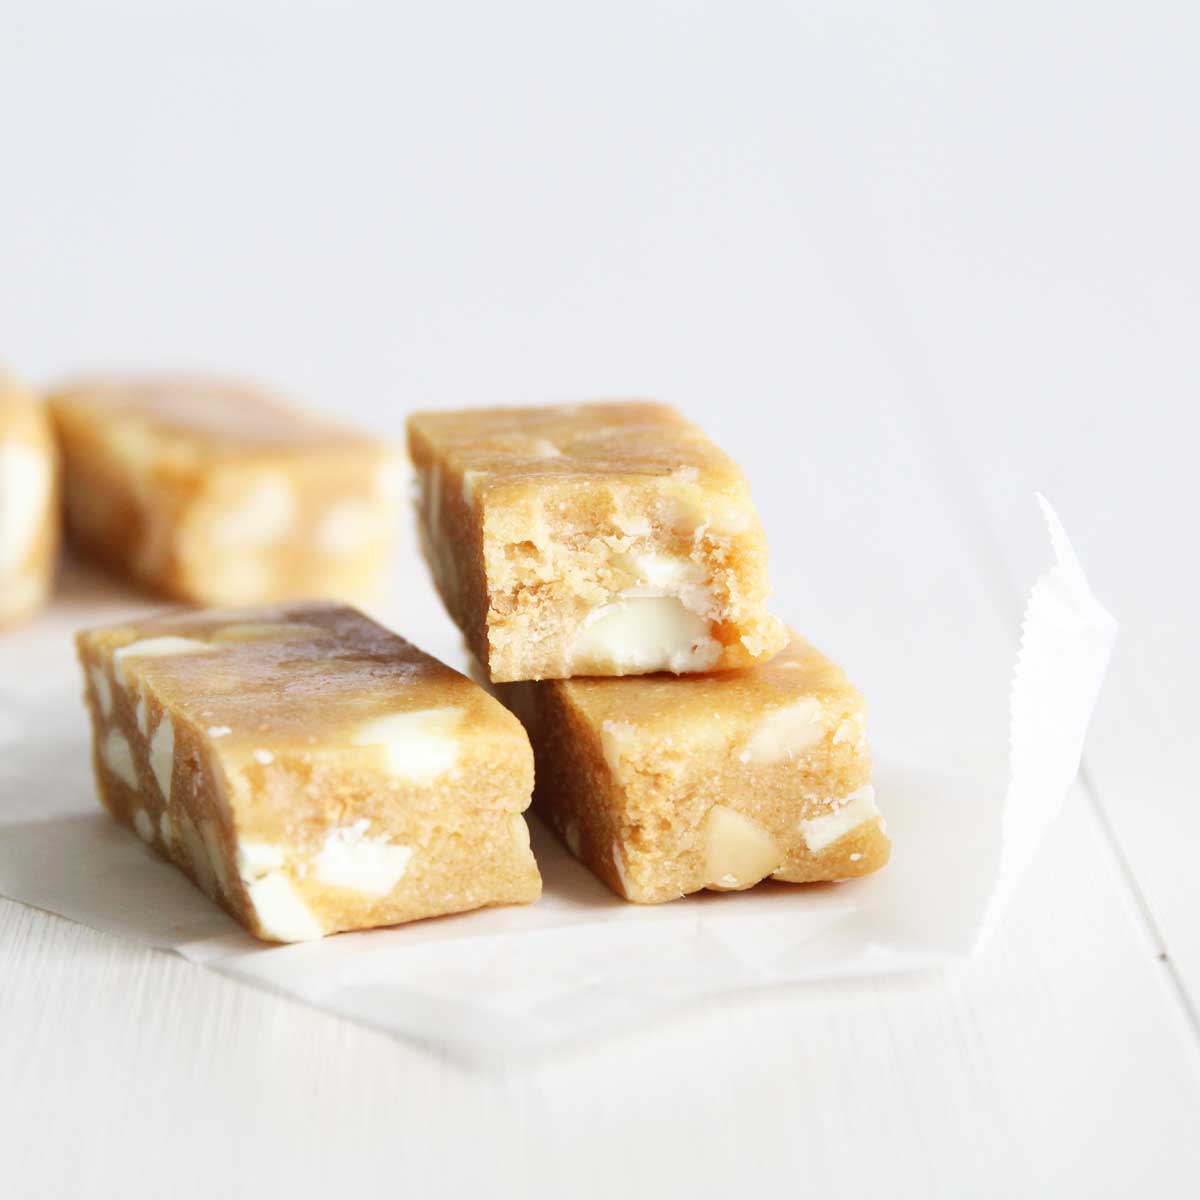 Chunky White Chocolate Macadamia Protein Bars Recipe (made with Collagen Peptides) - Nutella Protein Bars